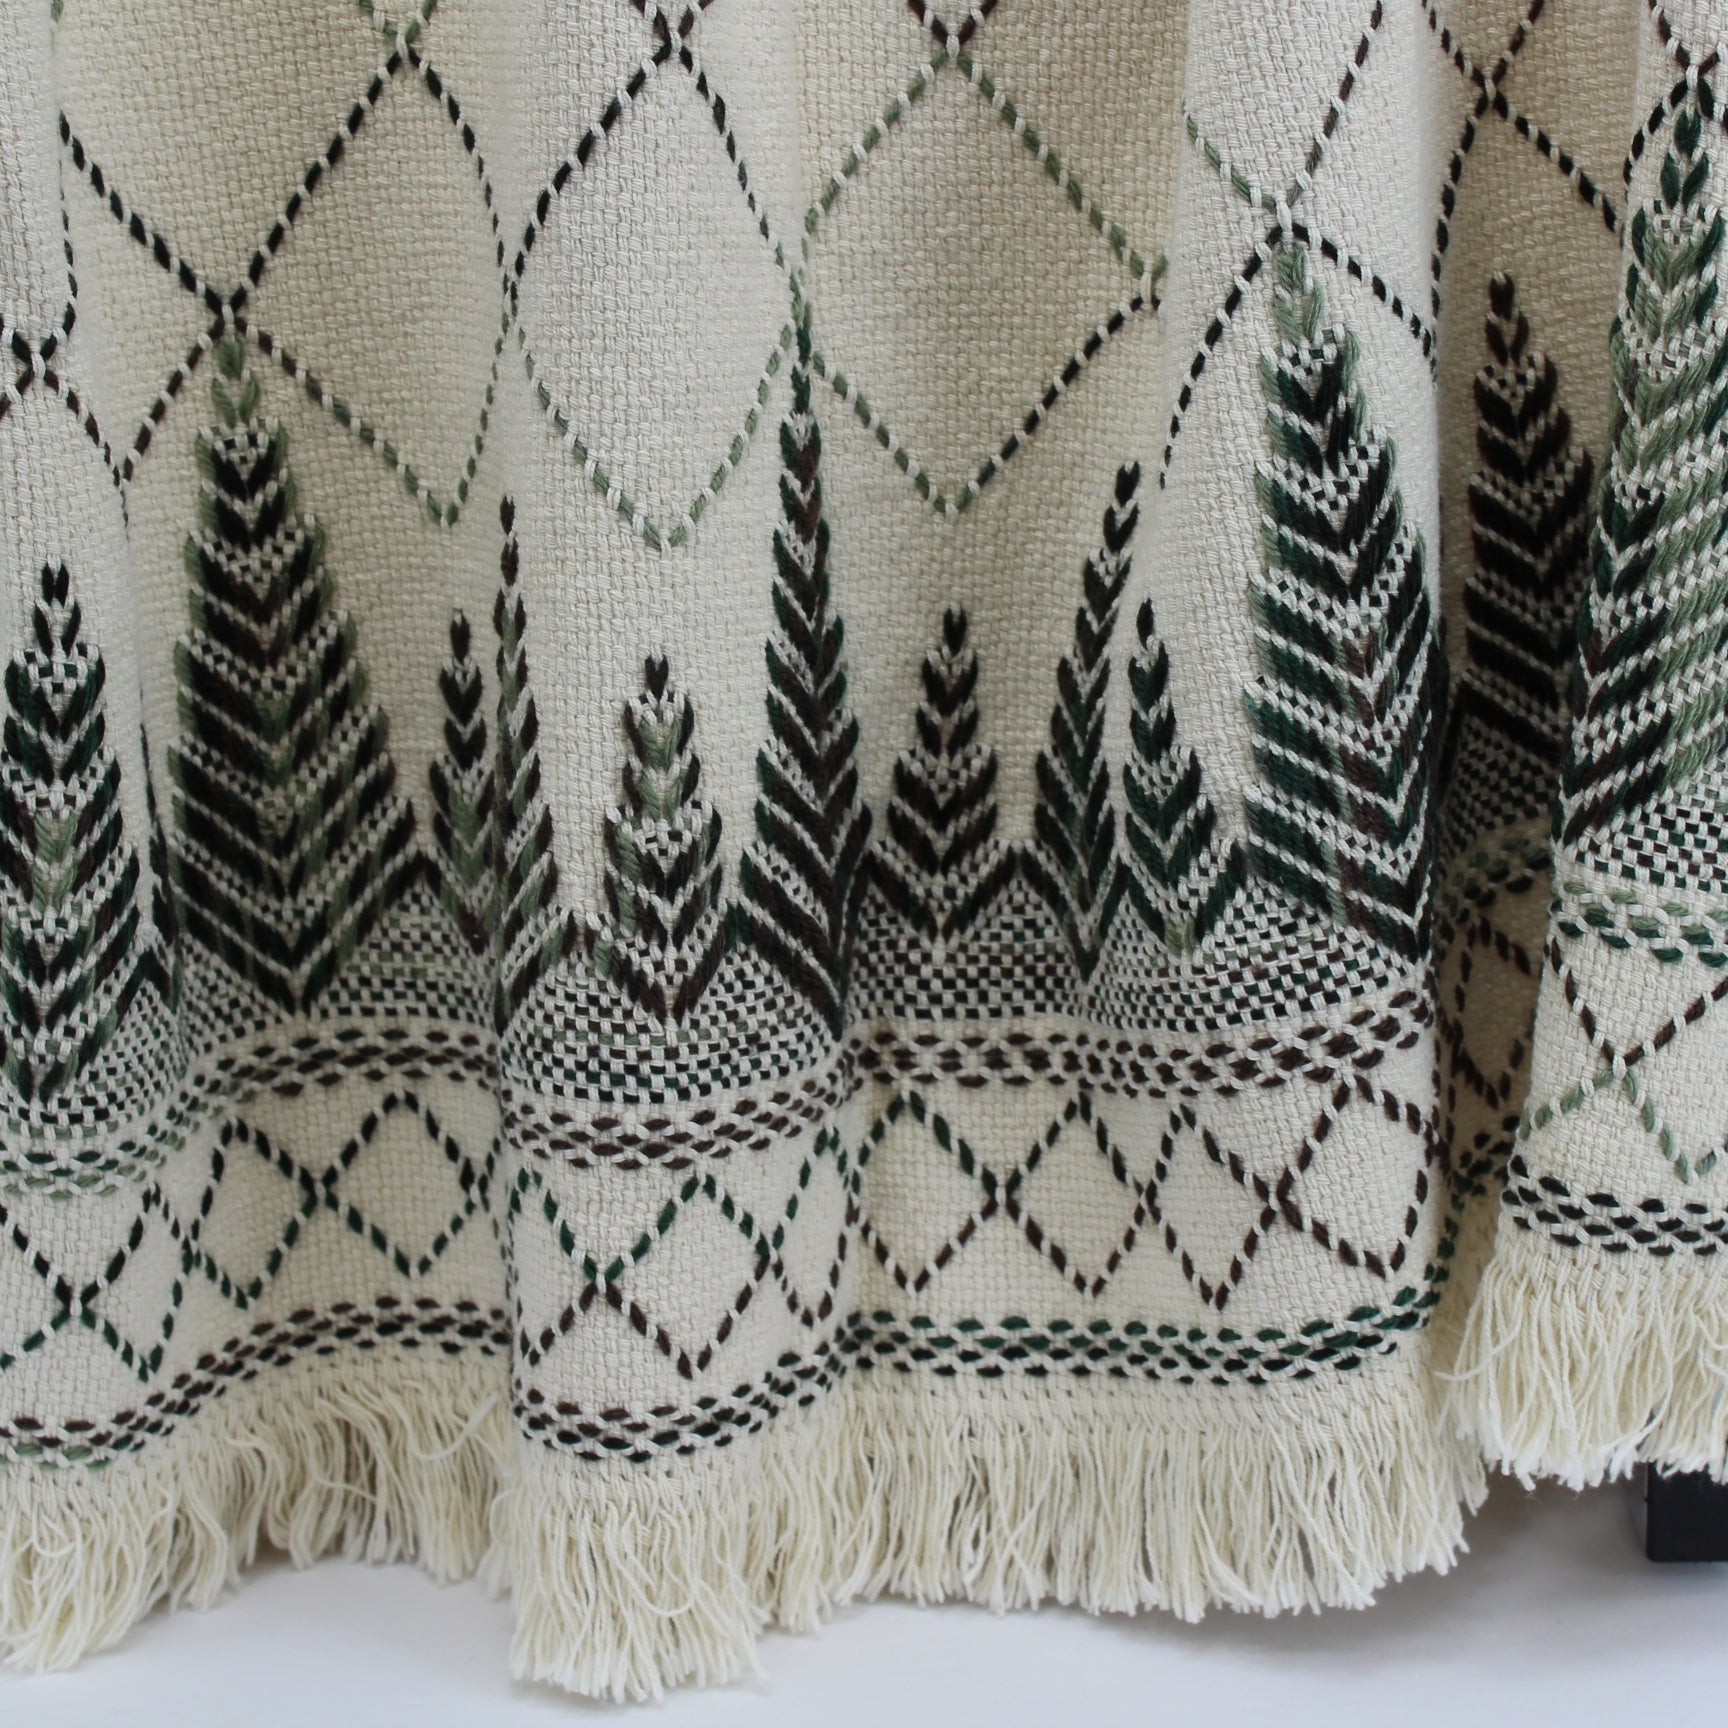 Huck Swedish Embroidery Cotton Throw Blanket Traditional Design Green Black Brown closeup view f design